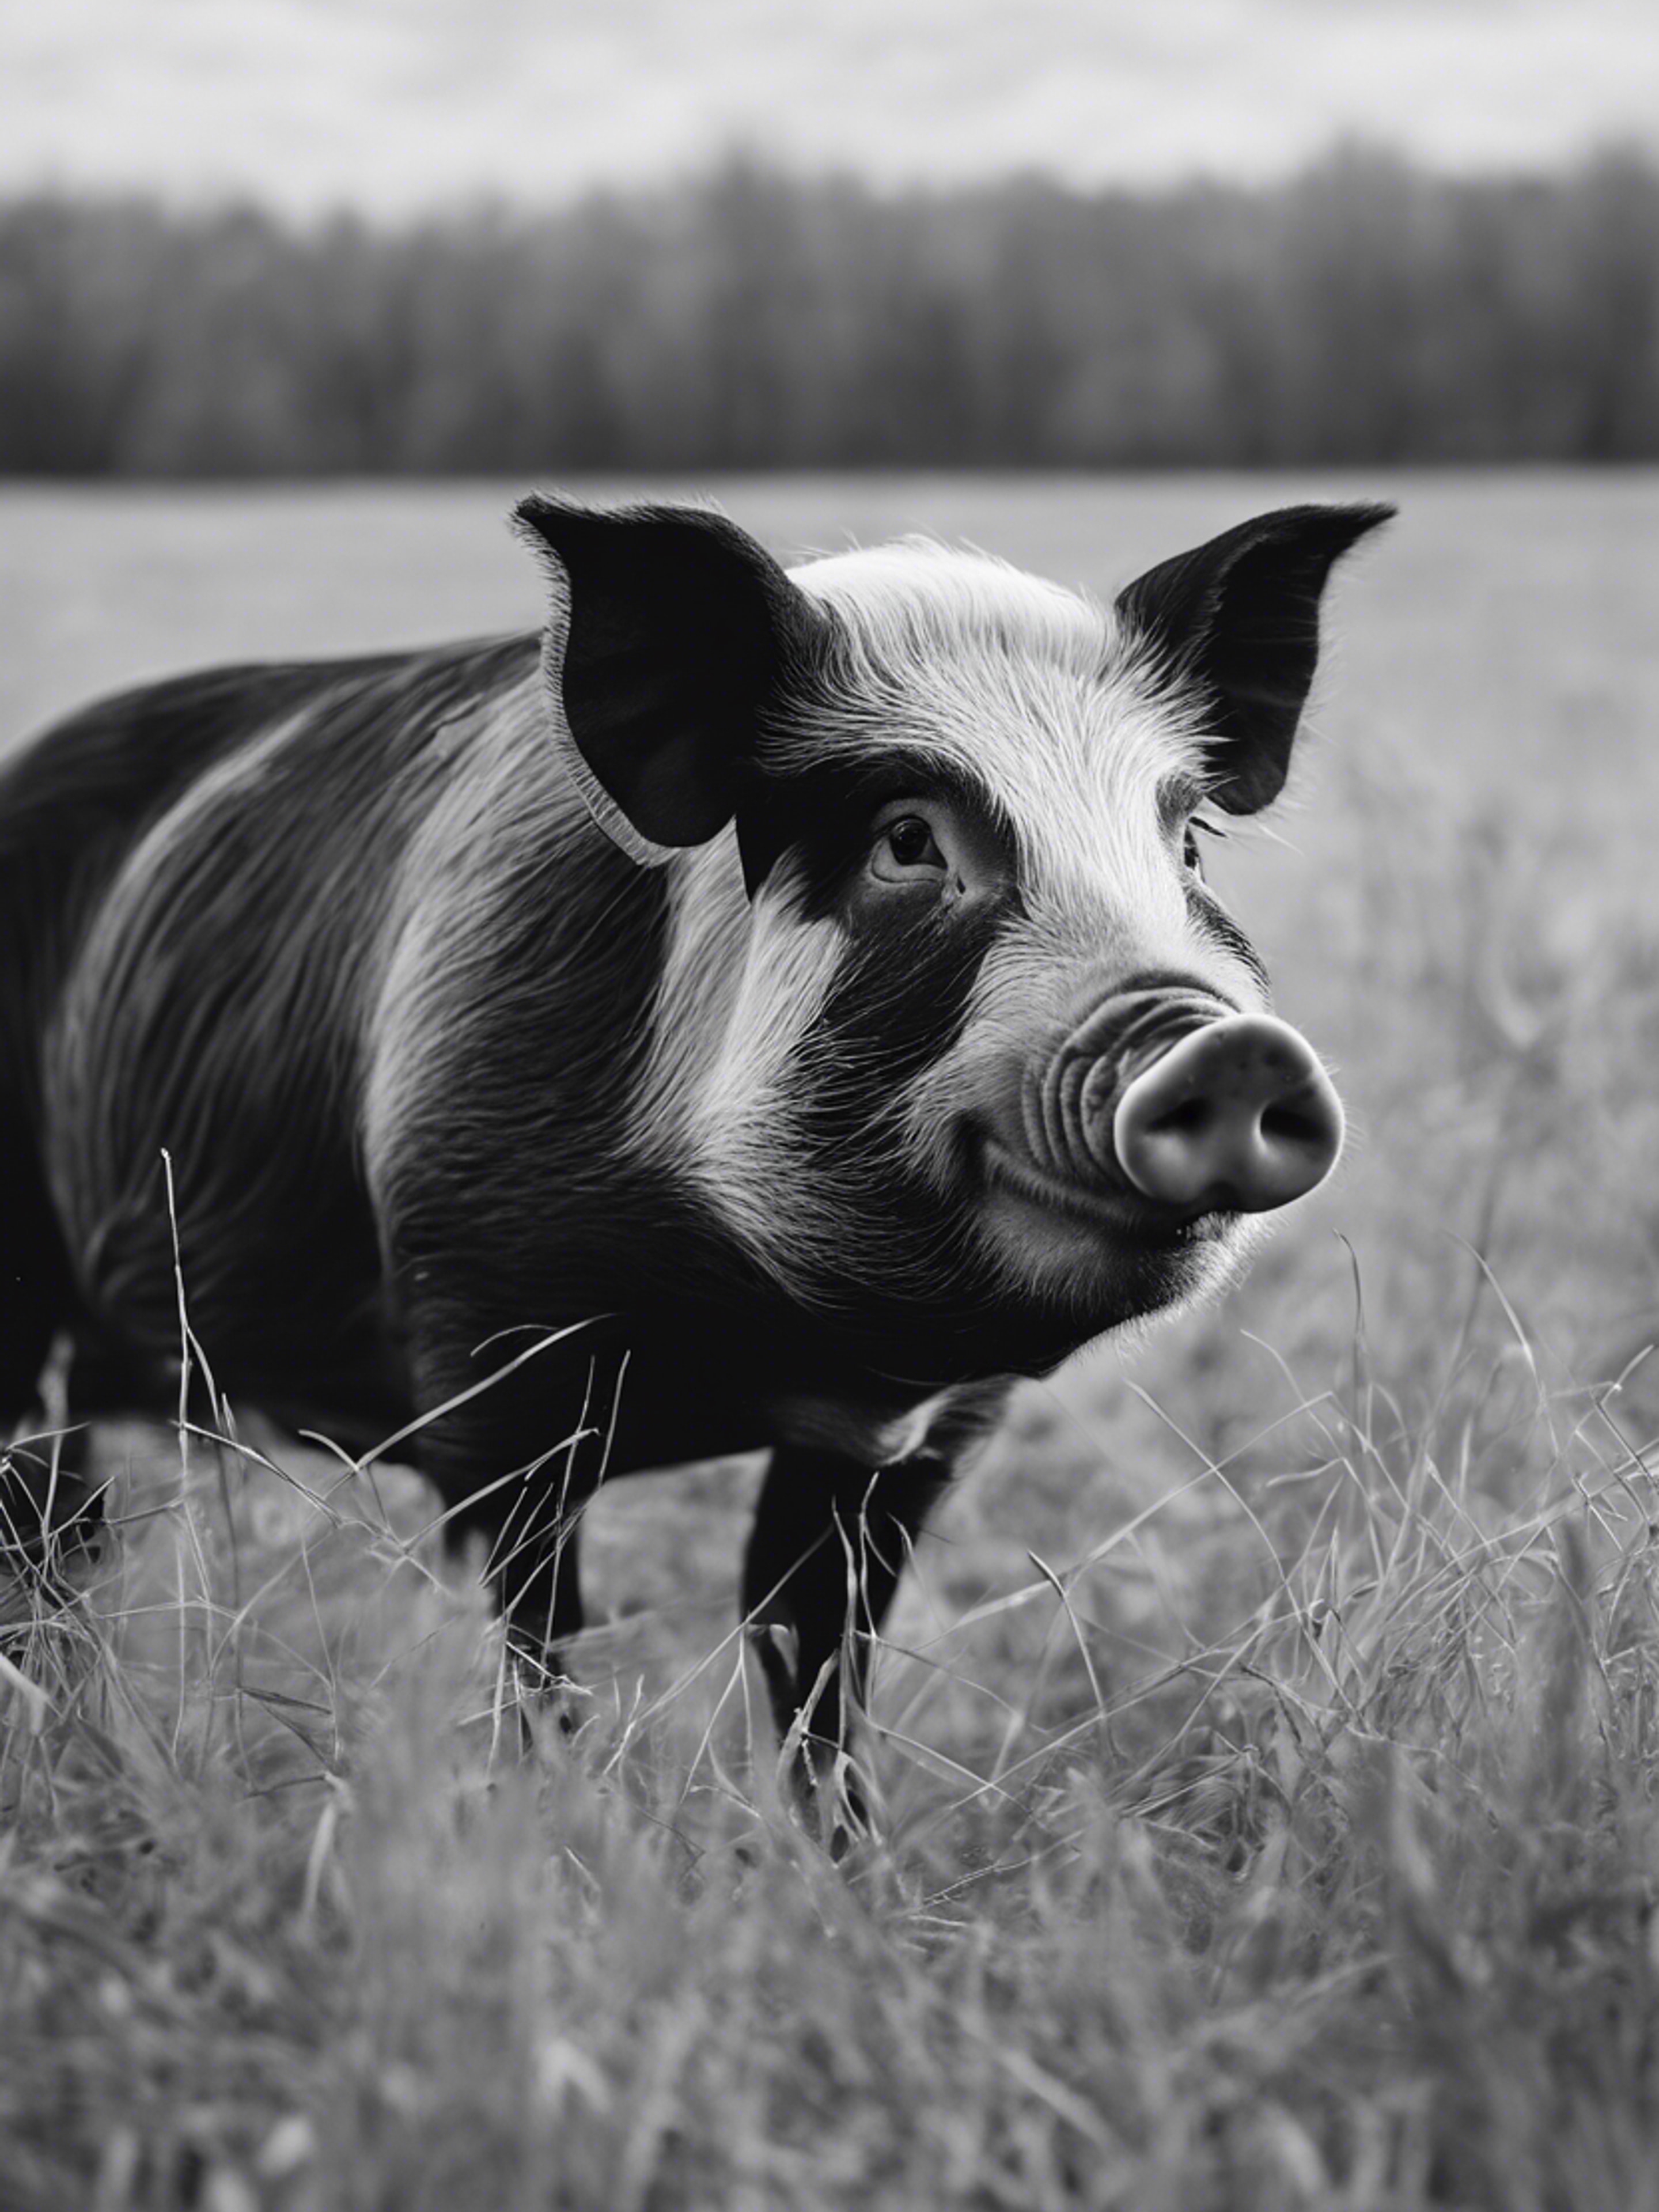 A black and white pig with clean fur, captured in a country meadow during tranquility of winter. Дэлгэцийн зураг[700eb497dc0e43a8b530]